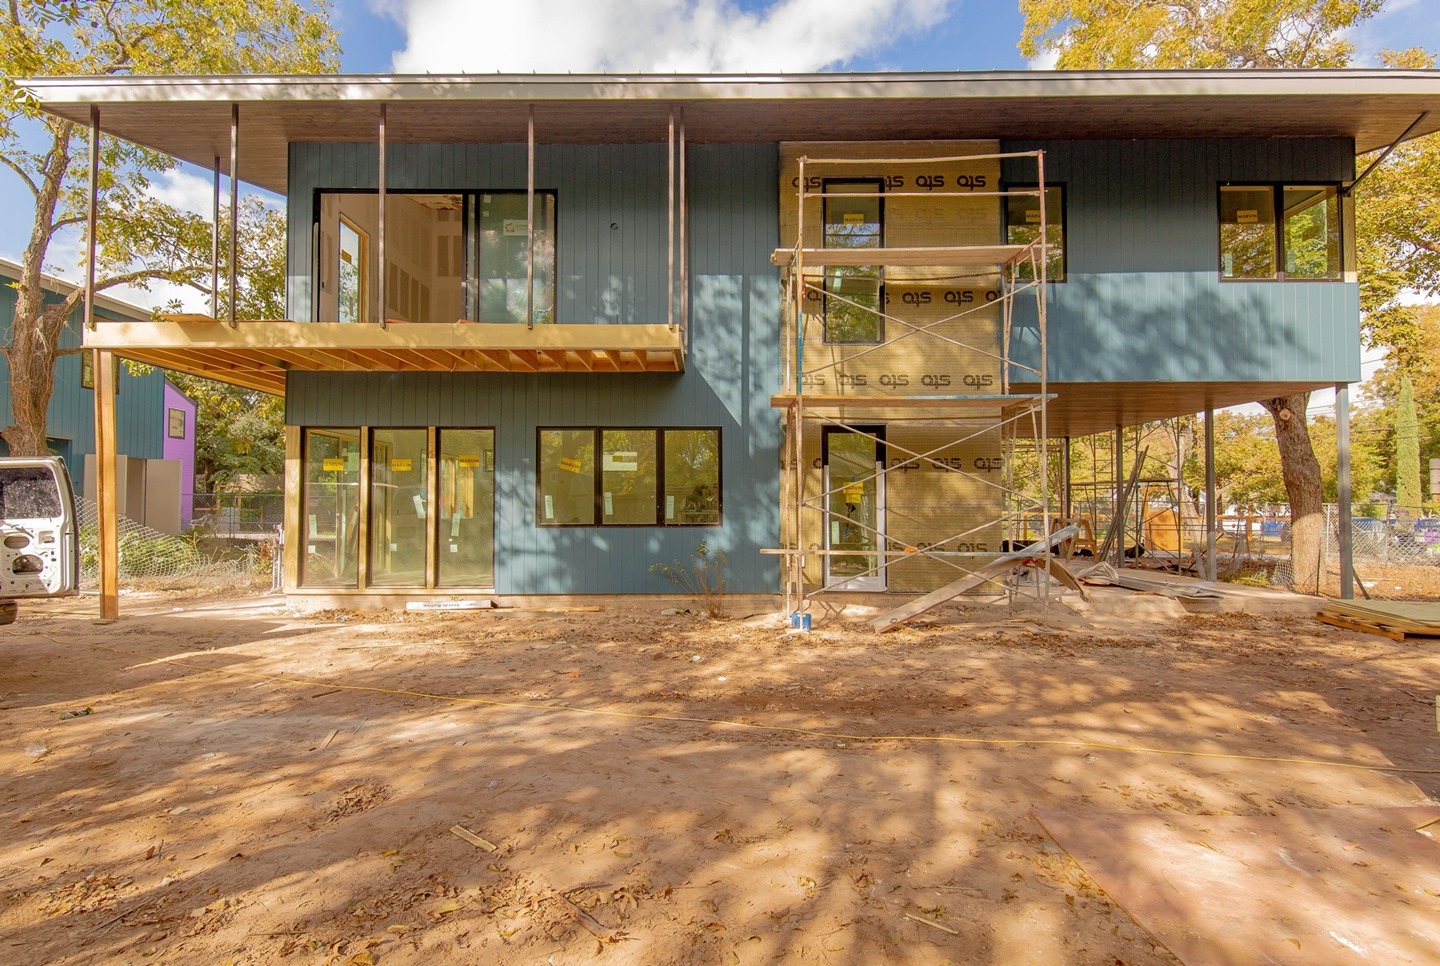 This East Austin home near Rainey is in the race to the finish